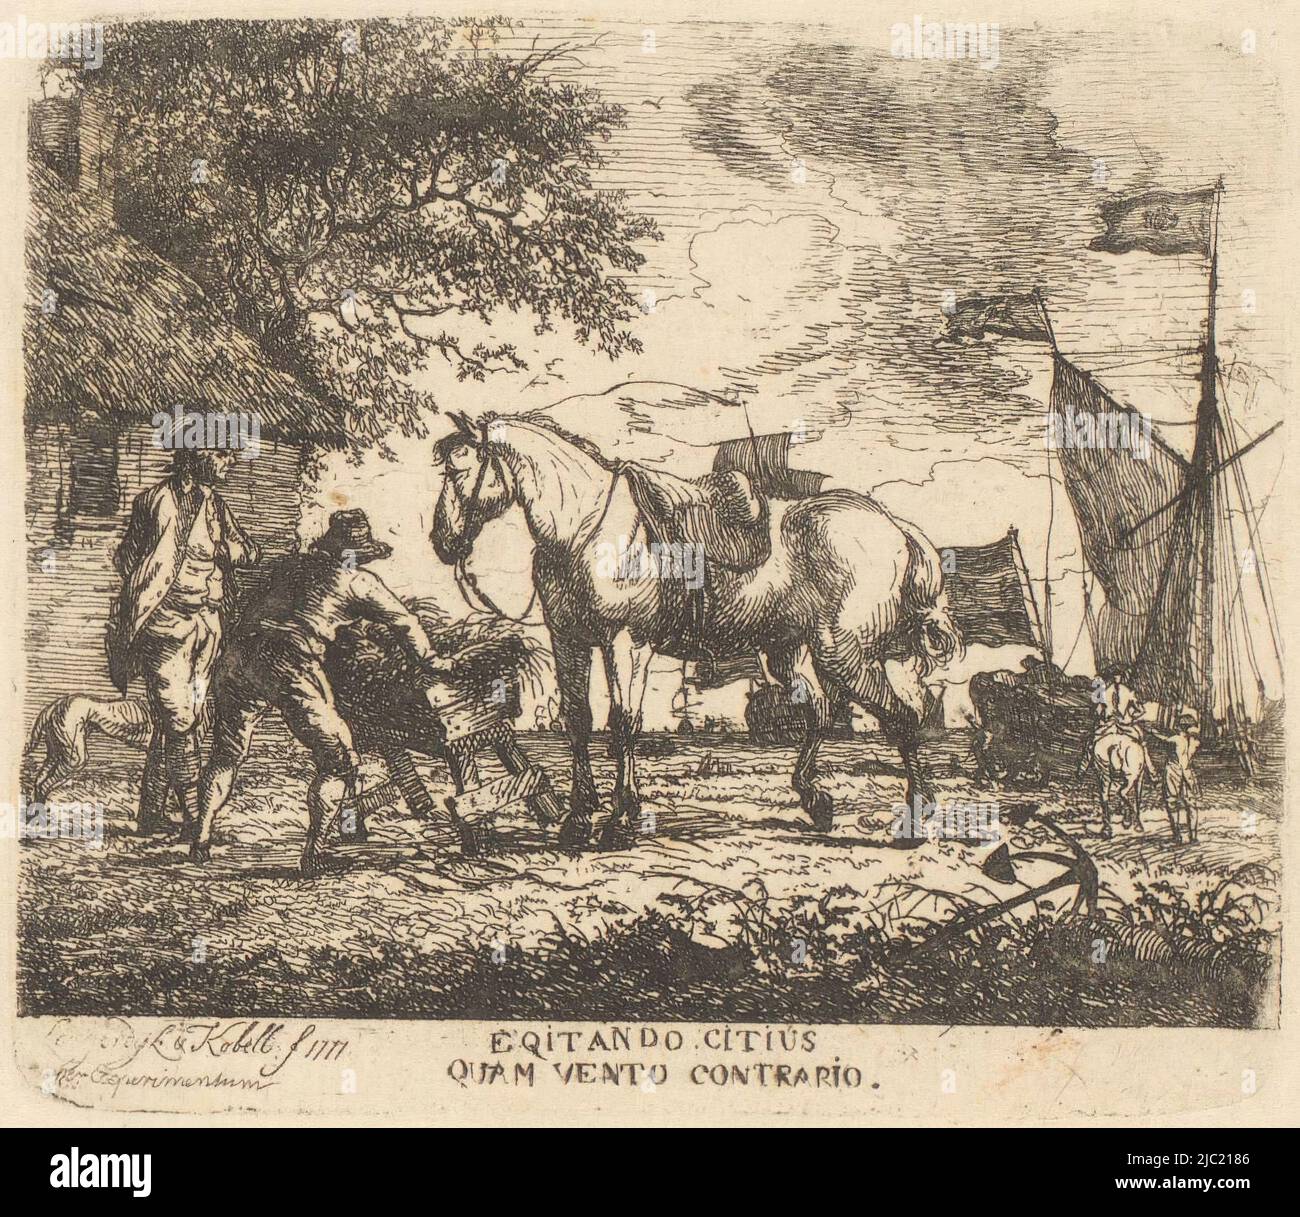 At a farm a man puts up a manger filled with hay for a saddled horse. A soldier watches in the company of a dog. In the background a soldier on horseback and several ships are depicted, in the foreground on the right an anchor, Feeding the horse Egitando citius quam vento contrario, print maker: Dirk Langendijk, (mentioned on object), print maker: Hendrik Kobell, (mentioned on object), 1777, paper, etching, h 79 mm - w 91 mm Stock Photo